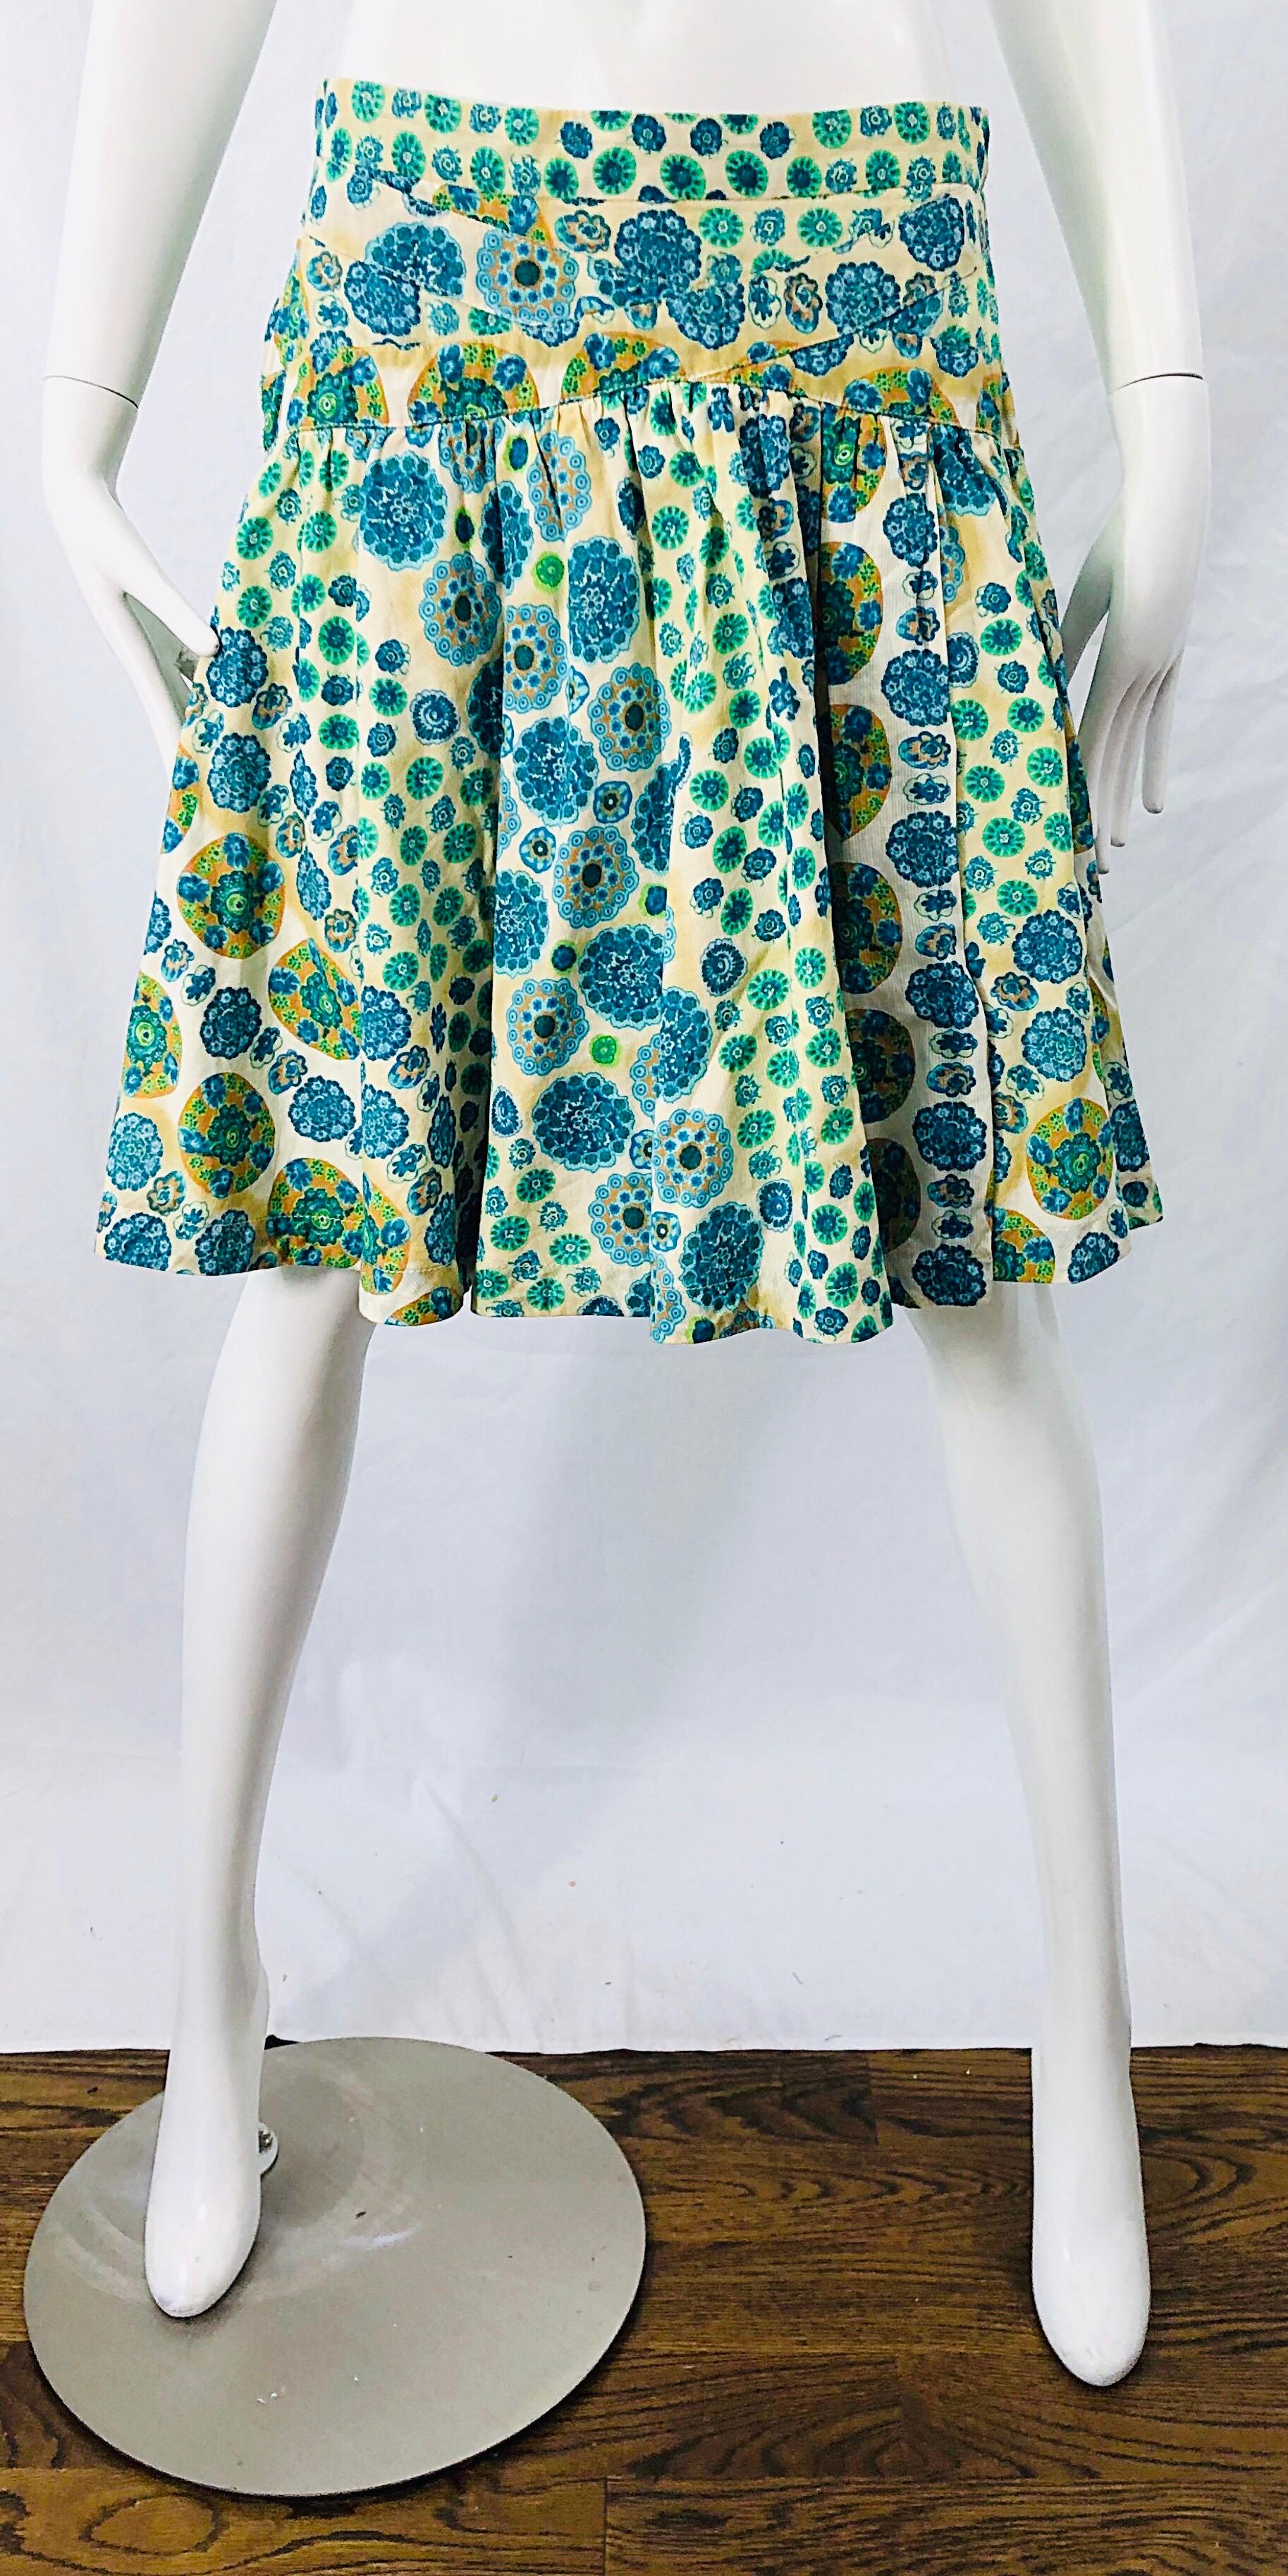 Chic early 2000s MARC JACOBS blue, green, orange, ivory and yellow low rise cotton skirt ! Features an abstract flower and polka dot print throughout. Hidden zipper up the side with hook-and-eye closure.
In great condition
Marked Size 2, but will